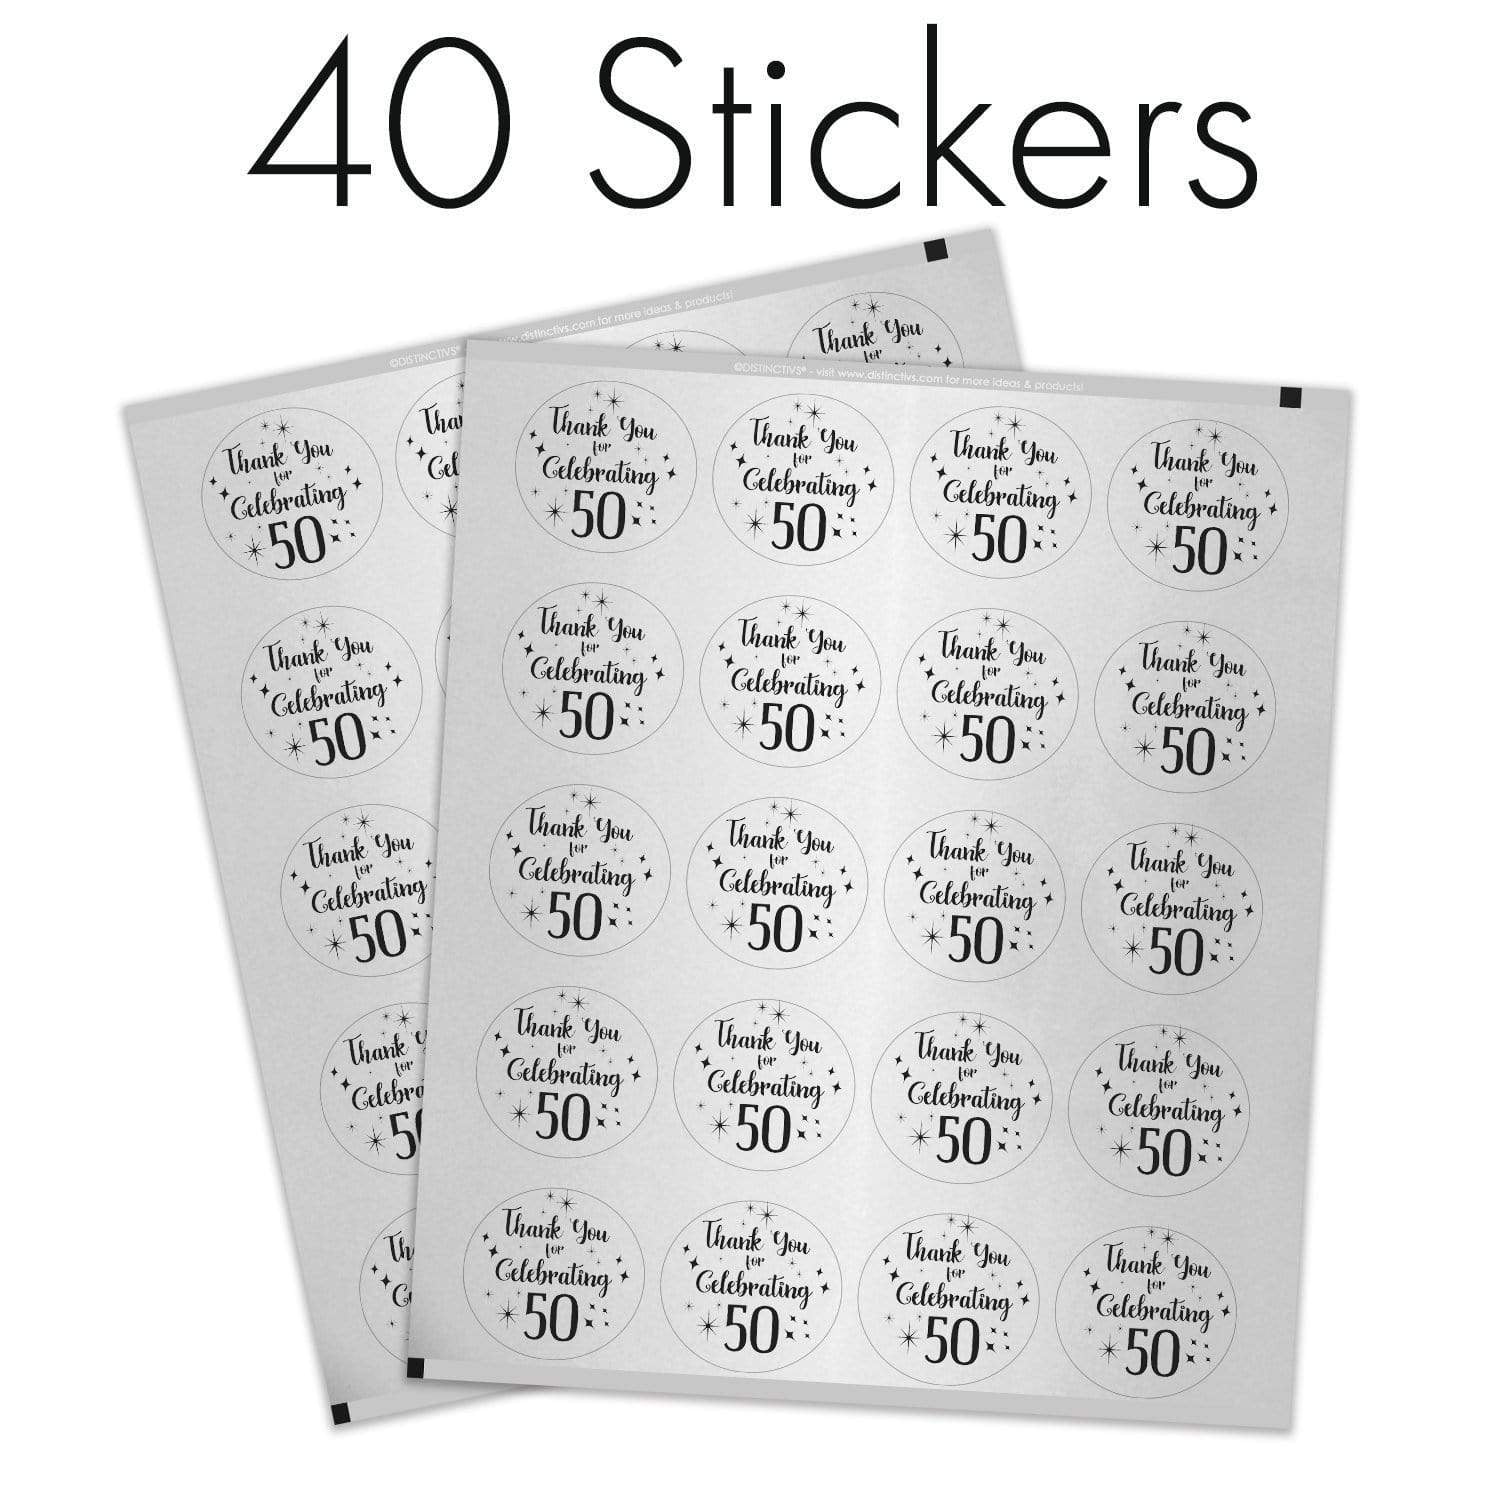 SPECIAL 50  THANK YOU STICKERSFULL COLORGLOSSLABELSFREE SHIPPING 